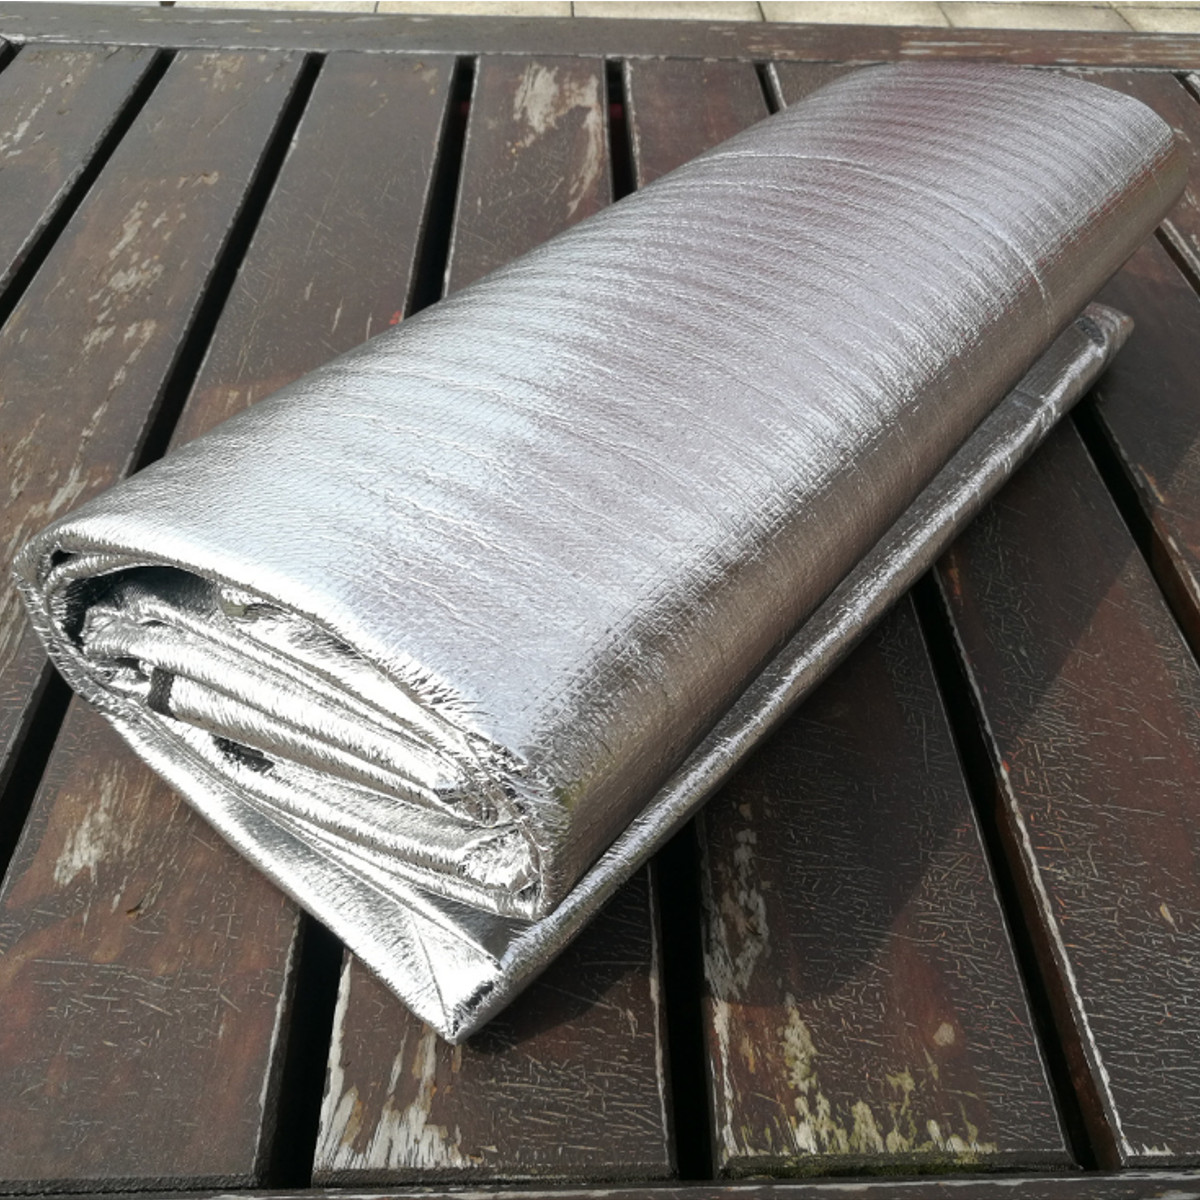 Outdoor-Double-sided-Tent-Mat-Aluminum-Film-Pad-Waterproof-Camping-Picnic-Blanket-1514848-6